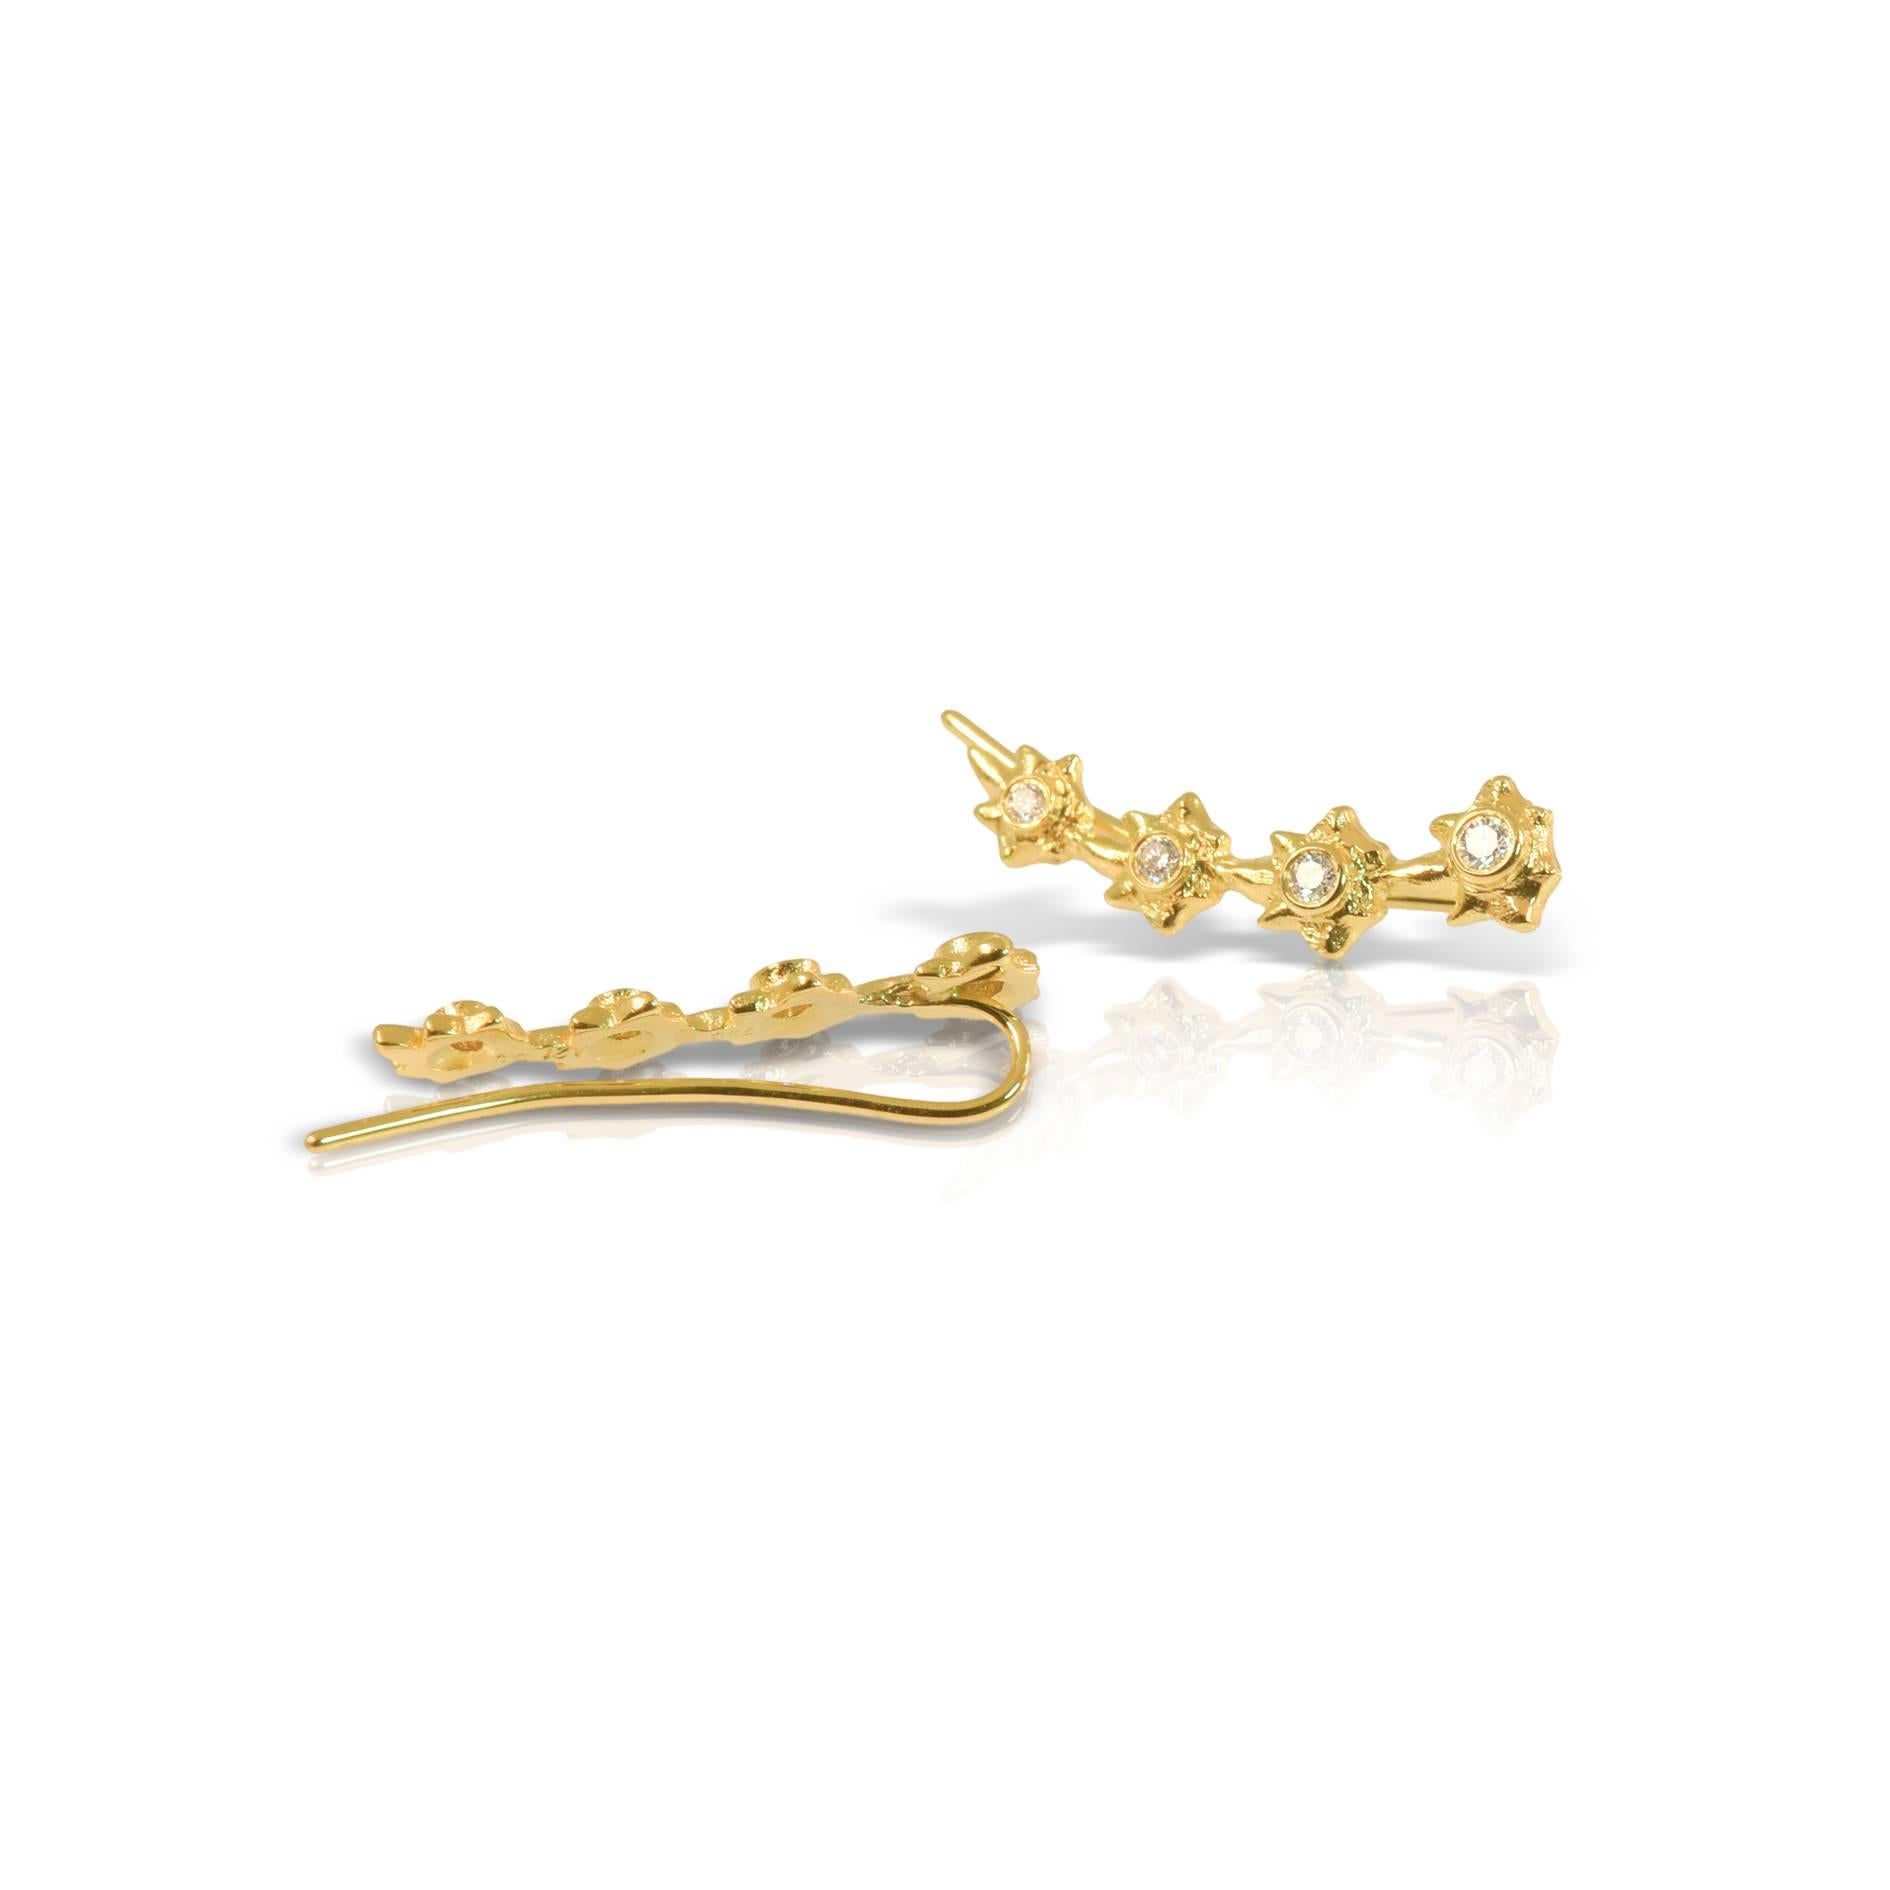 Earrings with flower motifs in 18k yellow gold and touches of diamonds from the Aurelia Collection. 
Depending on stock levels it may take 2 weeks to have the item ready to be shipped.
Price is for pair. Earrings can also be sold as a single